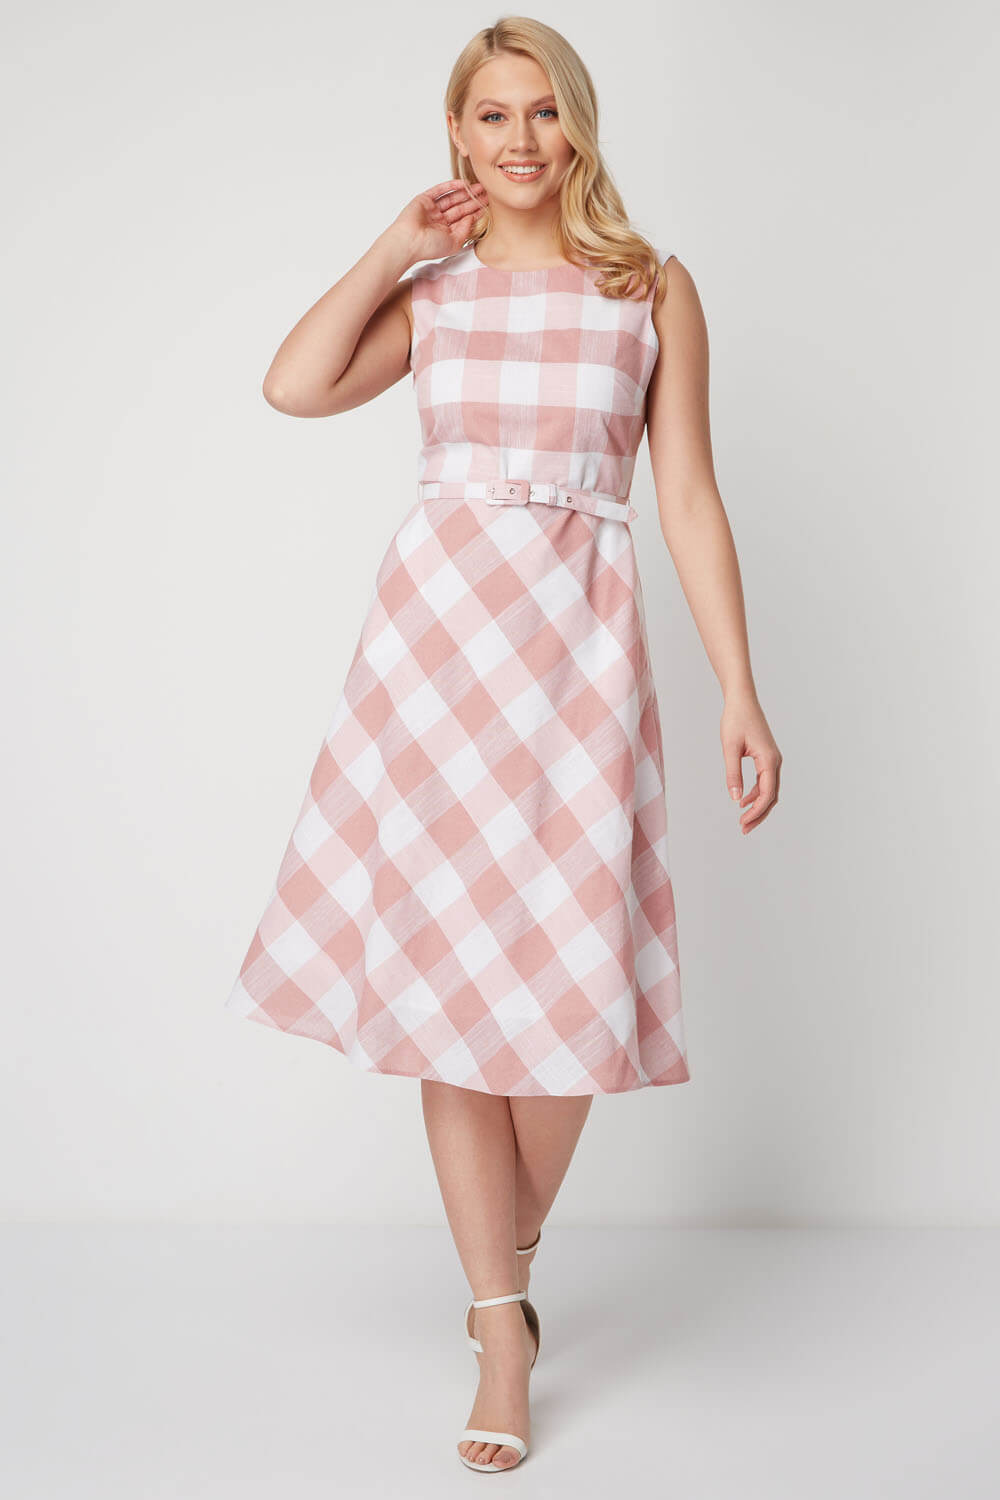 PINK Check Print Fit and Flare Dress, Image 2 of 5